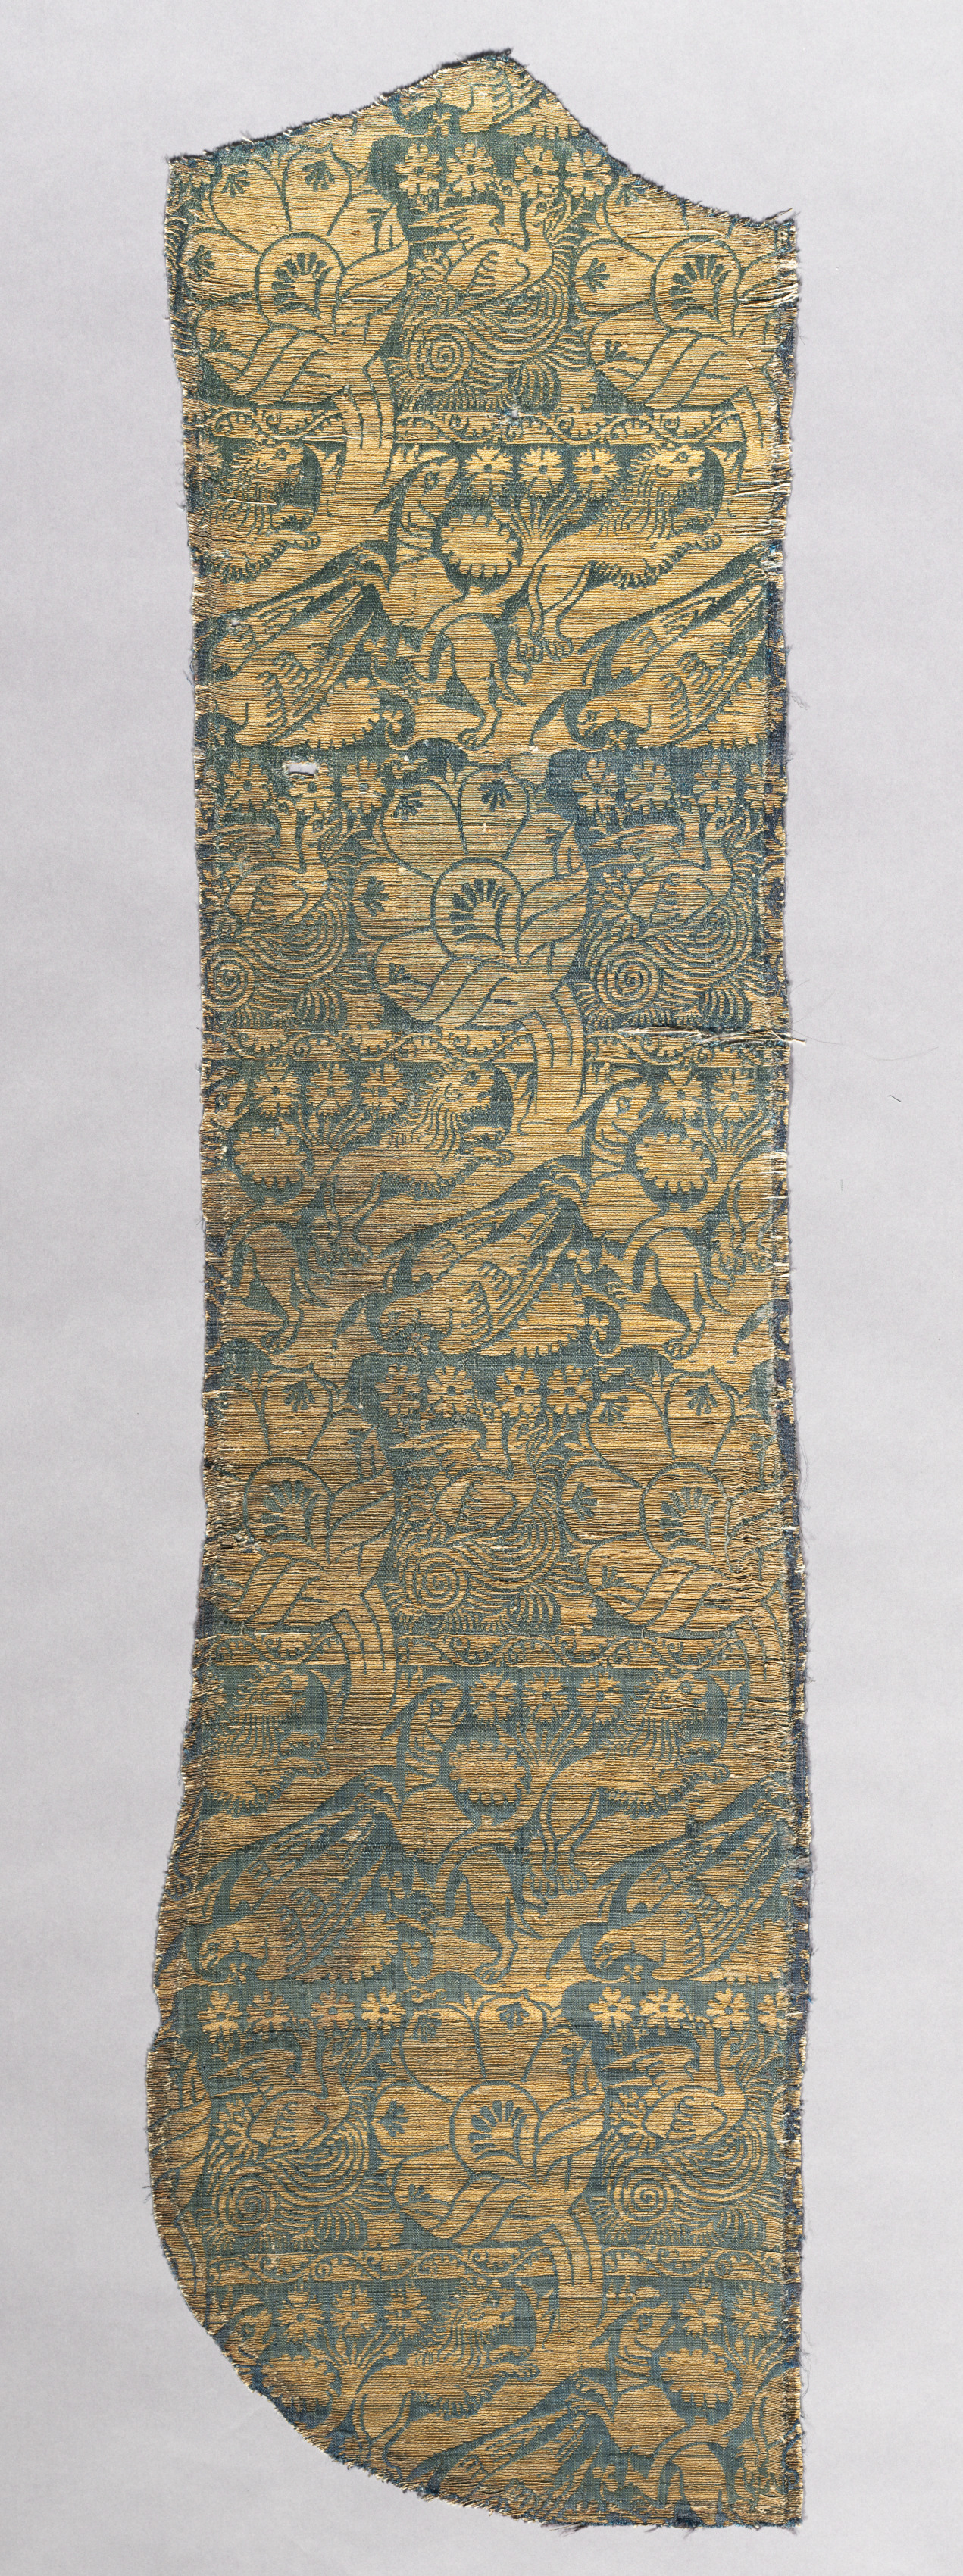 Chasuble Fragment with Realistic Animals